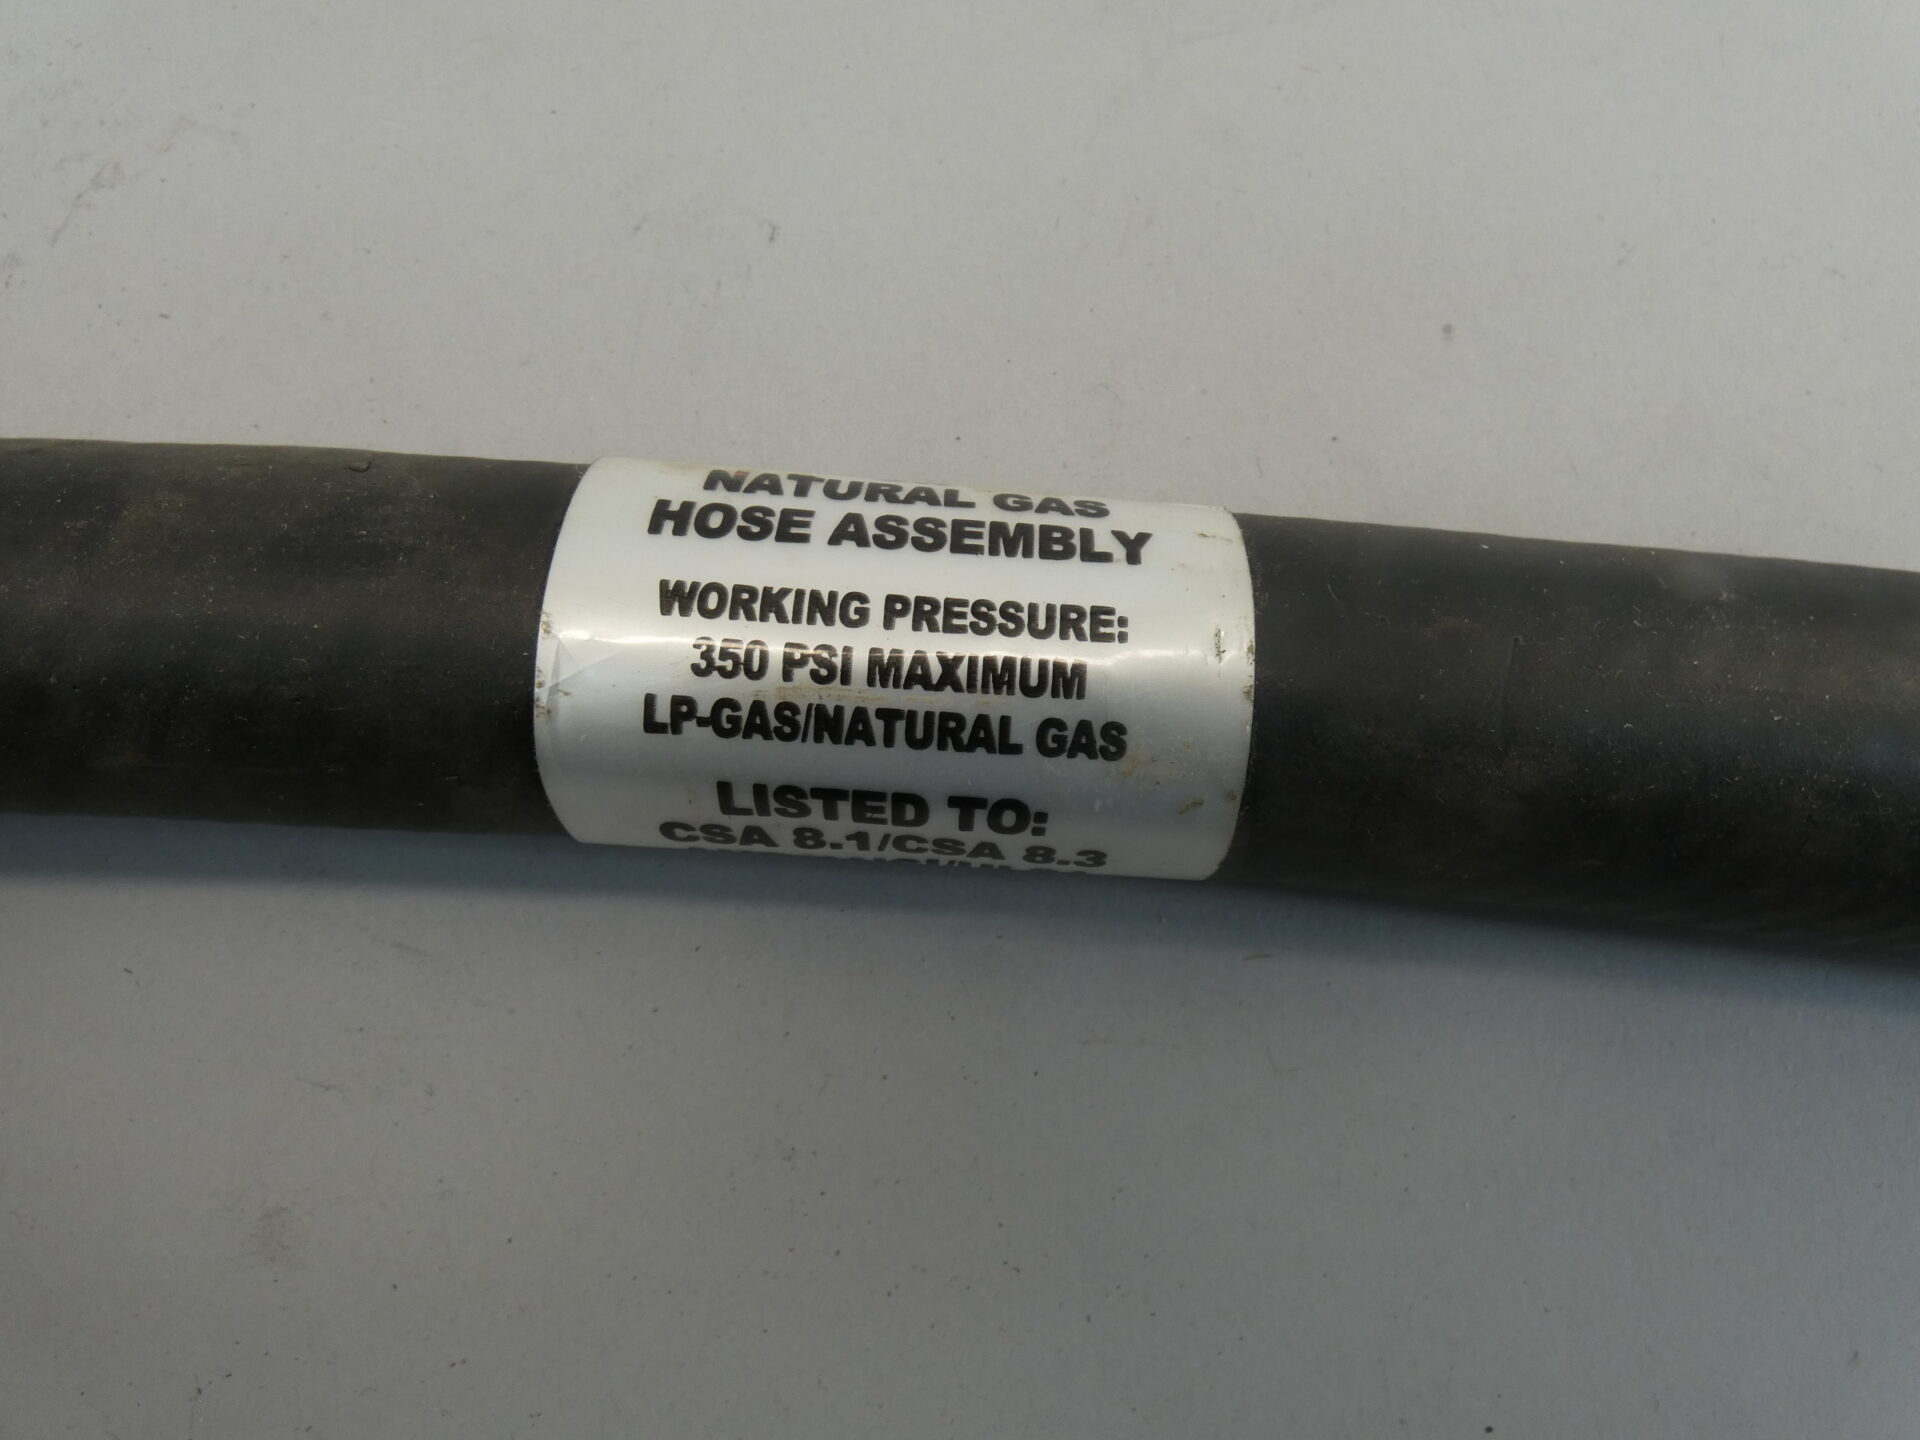 1/2" ID LP GAS HOSE PARKER DATED 2006 WORK PRESS 350 PSI 1750 BURST SOLD BY FOOT 